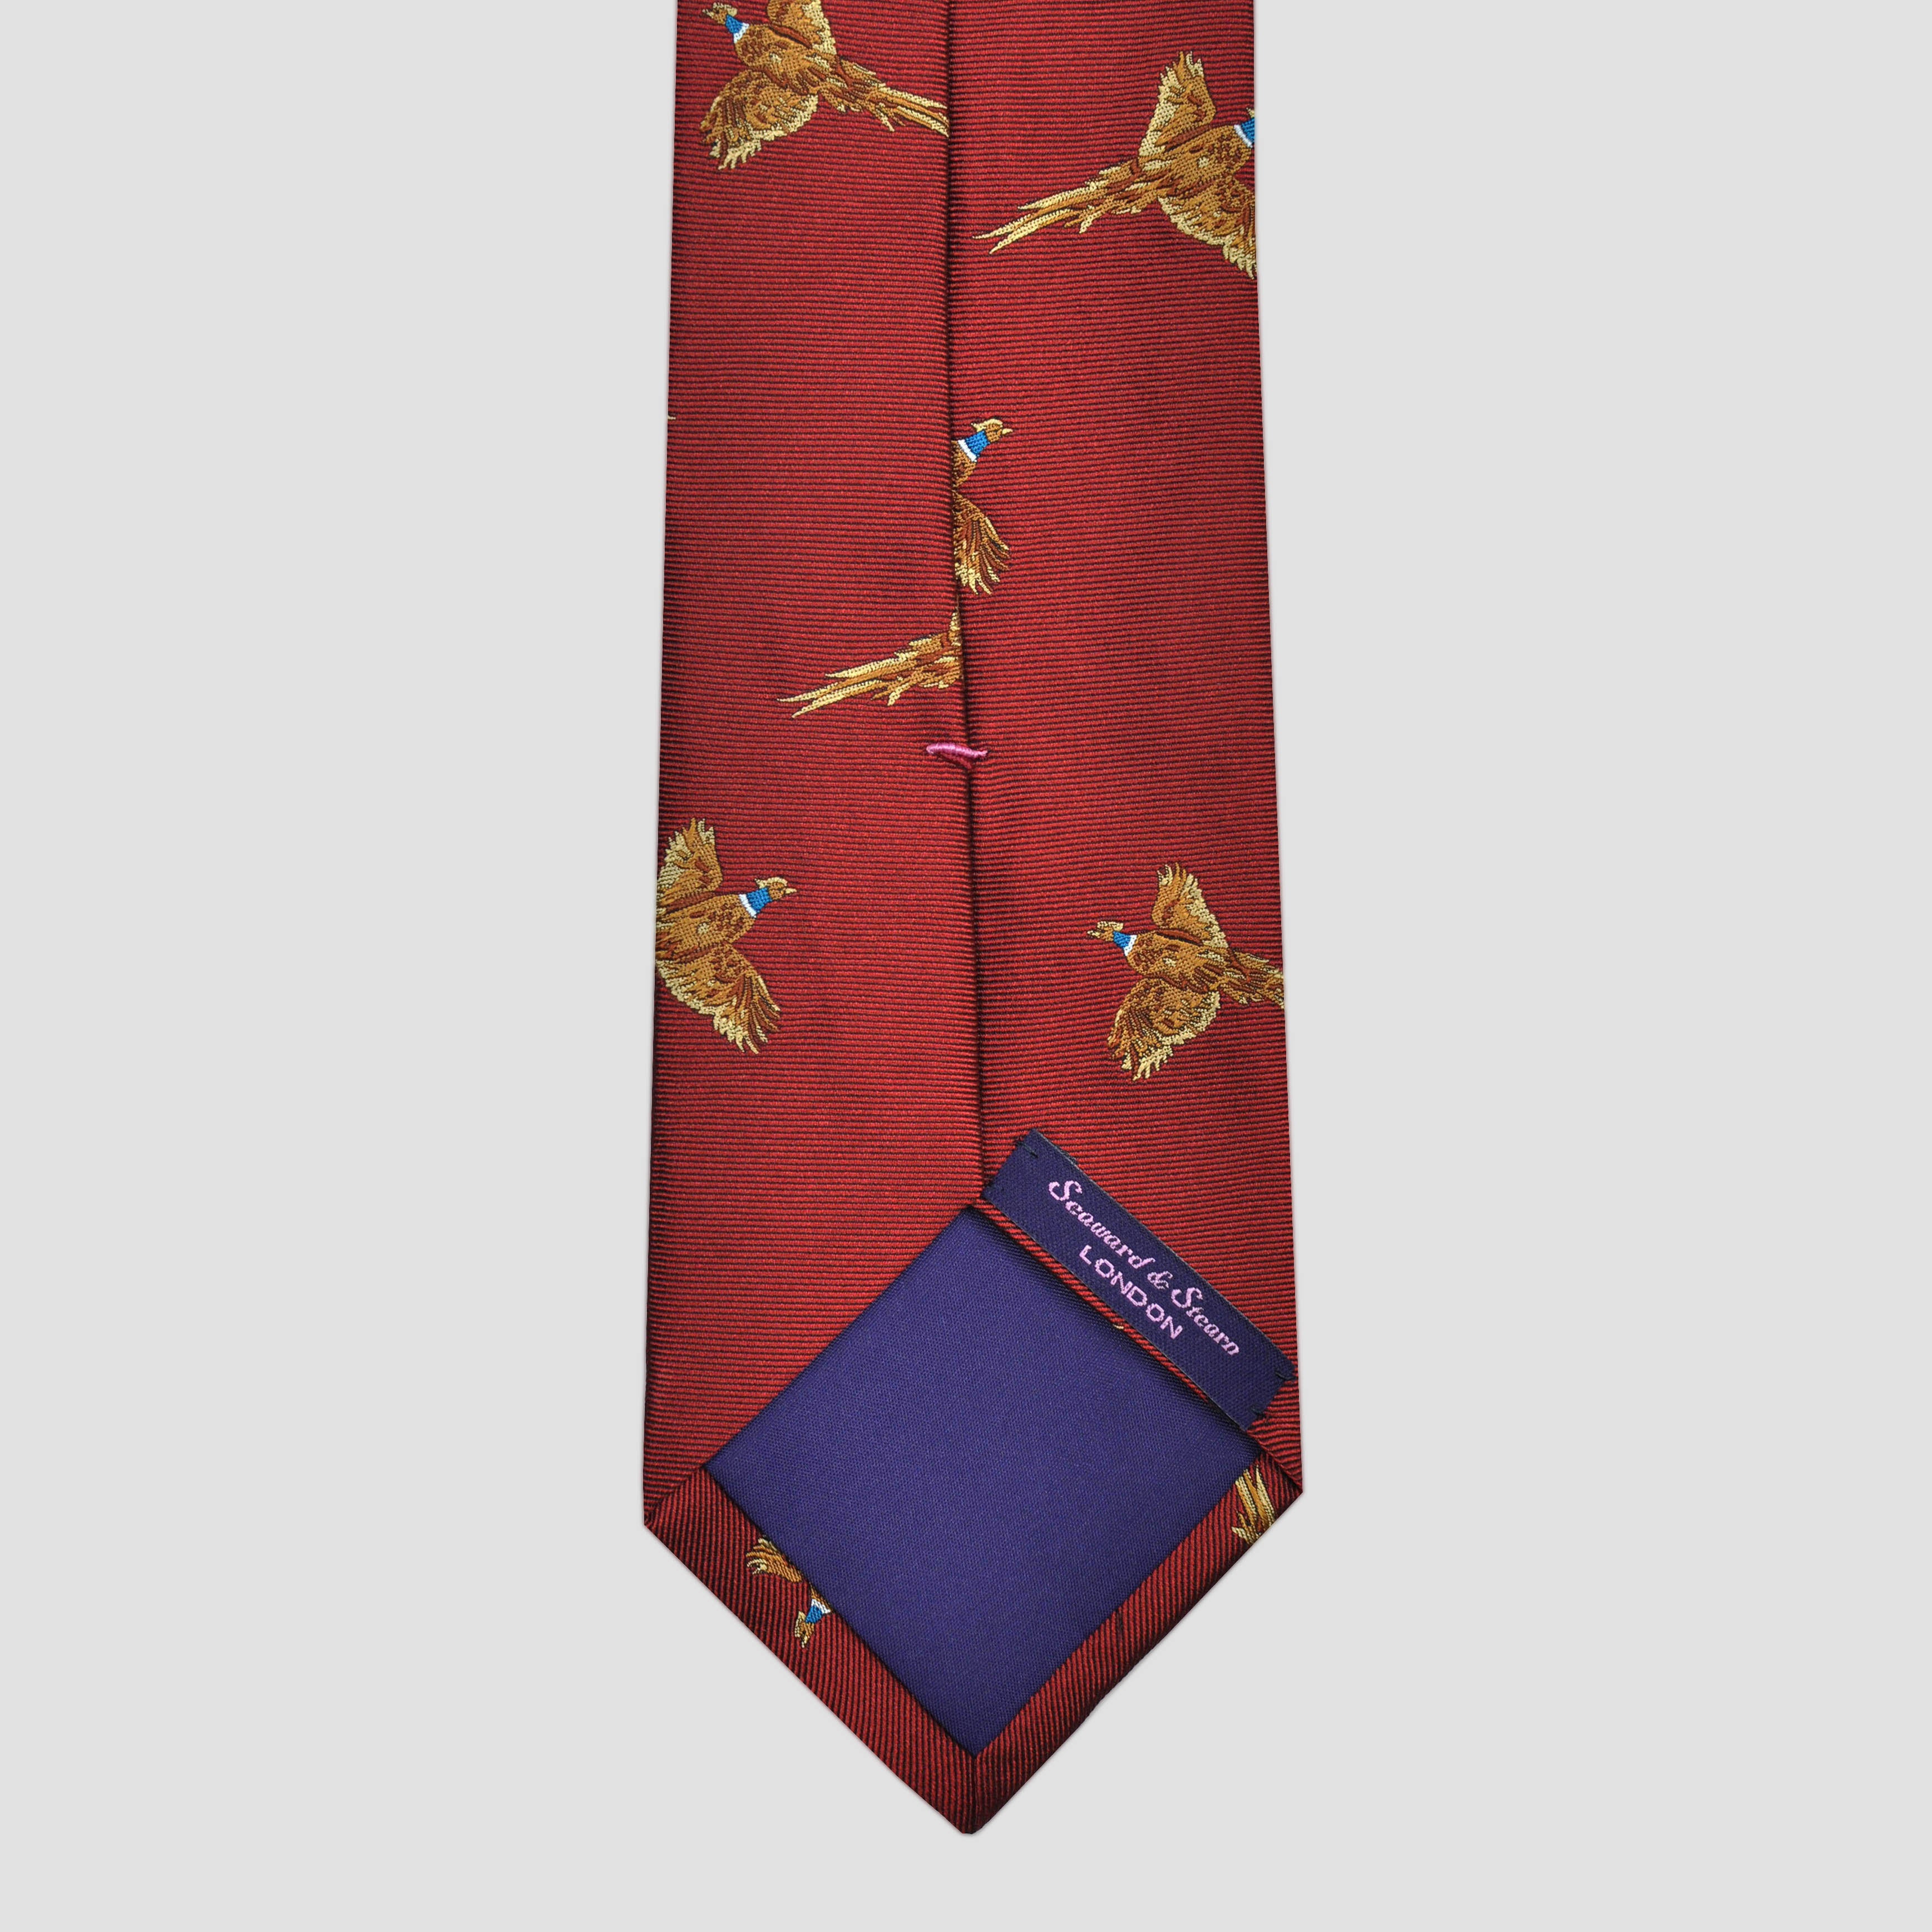 English Woven Silk 'Flying Pheasant' Tie in Rusty Brown